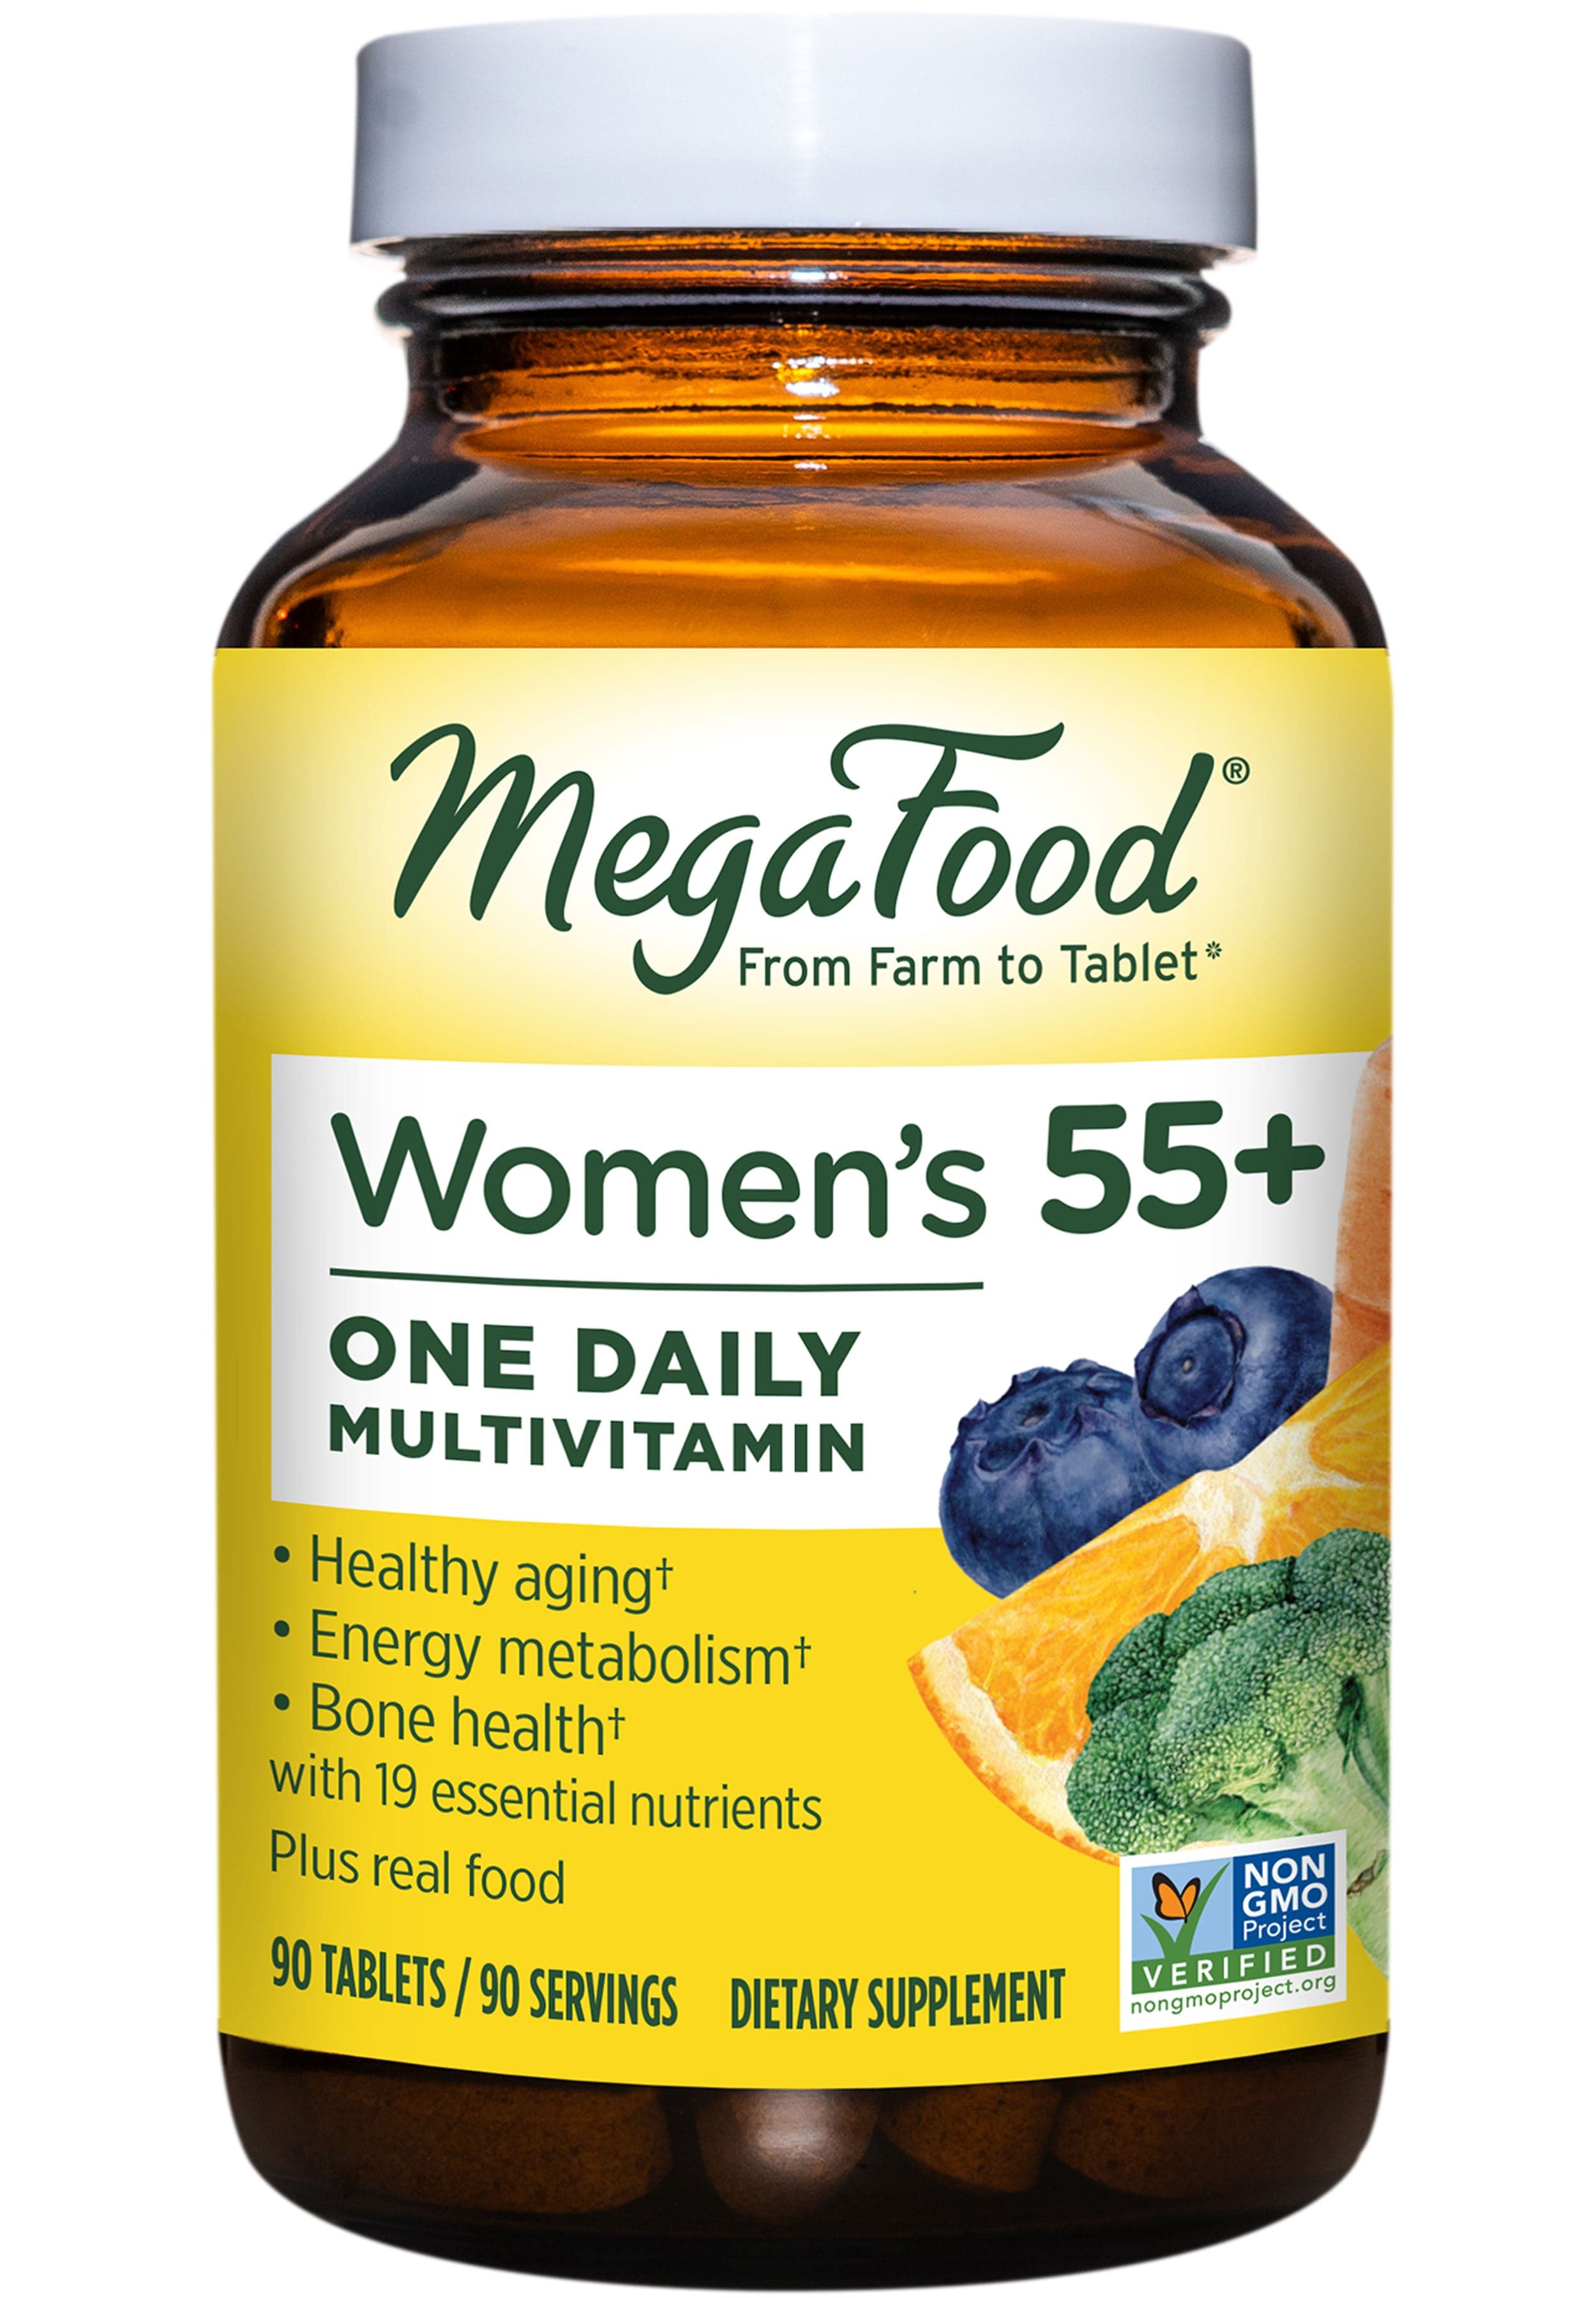 MegaFood Women's 55+ One Daily Multivitamin (Formerly Women Over 55 One Daily)